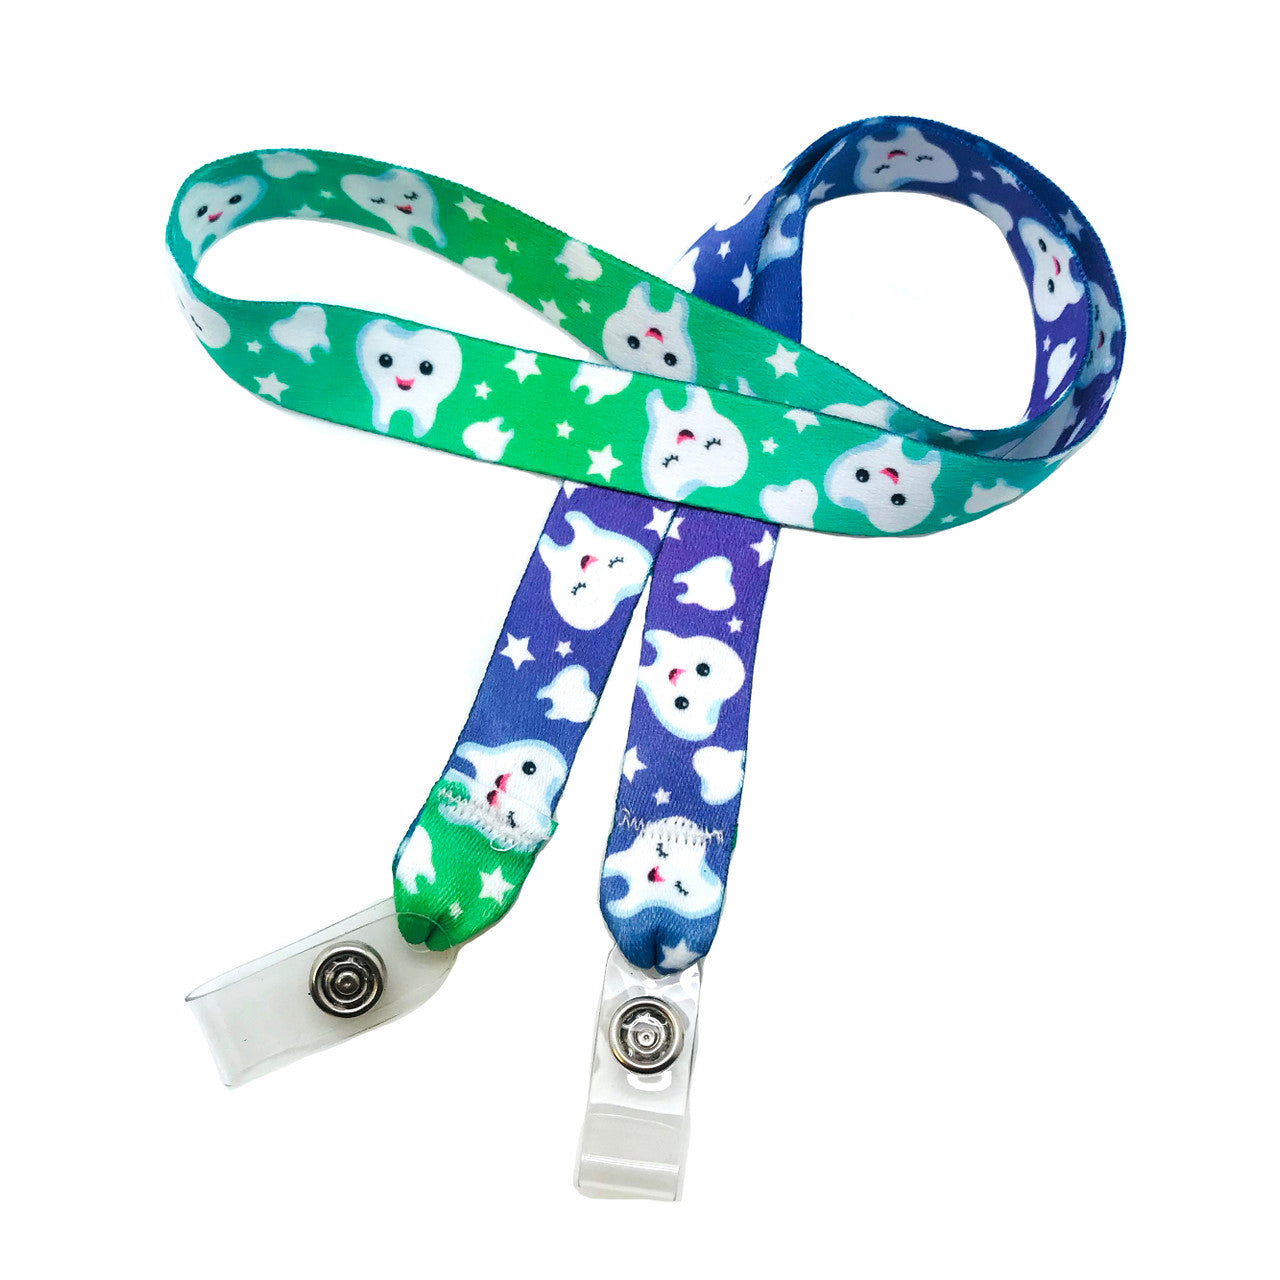 24" mask holder with soft plastic snap closures printed with our teeth design printed on both sides on  5/8" Ultra Lanyard material is  perfect for adults to keep track of face masks at  work, school, sports practice, lunch and break time.